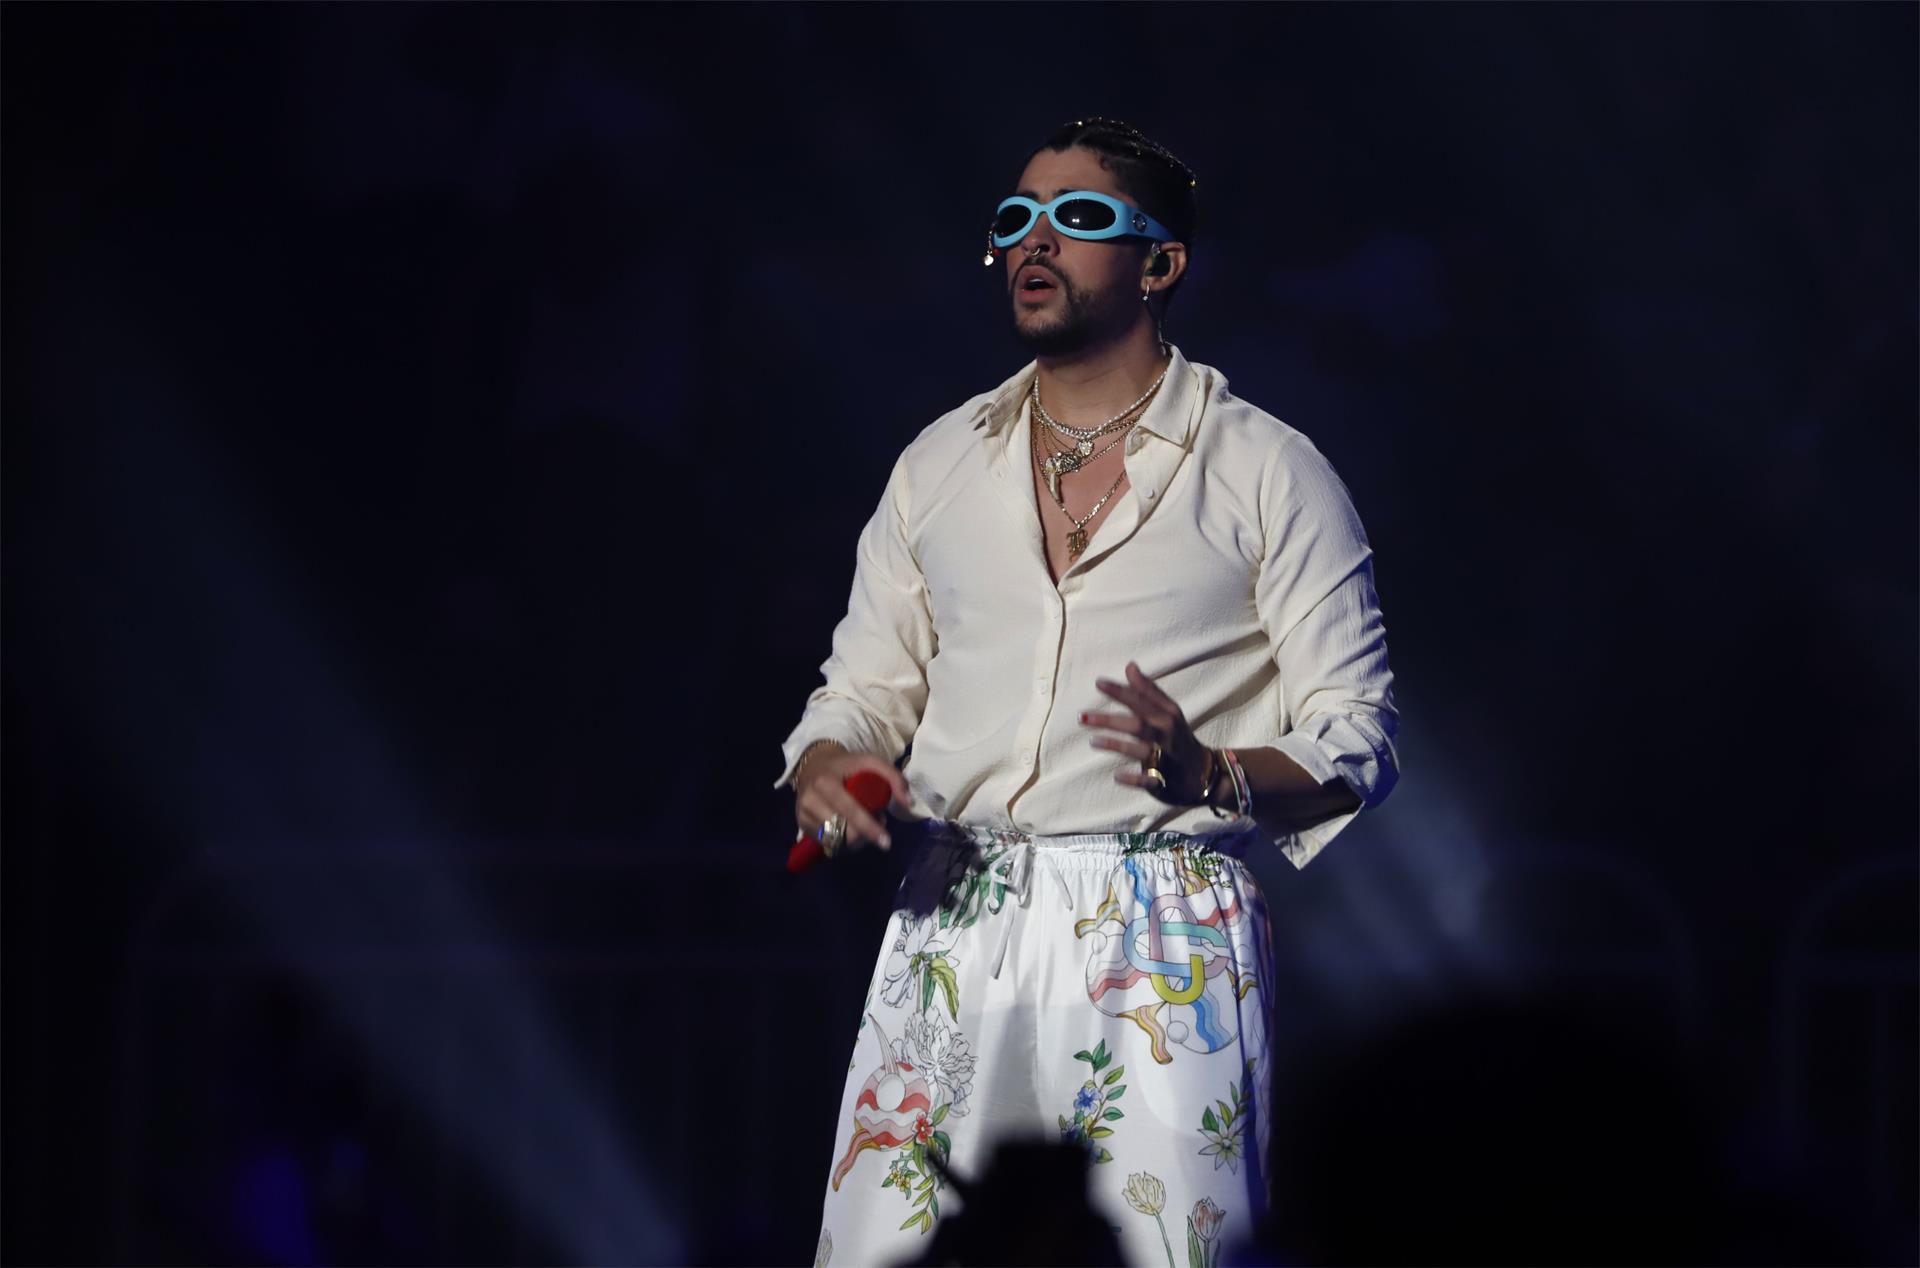 Top Chart Artist, Bad Bunny performs 'Un Verano Sin Ti' sold-out concert  dates and debuts Miami restaurant during his South Florida tour — SoundBite